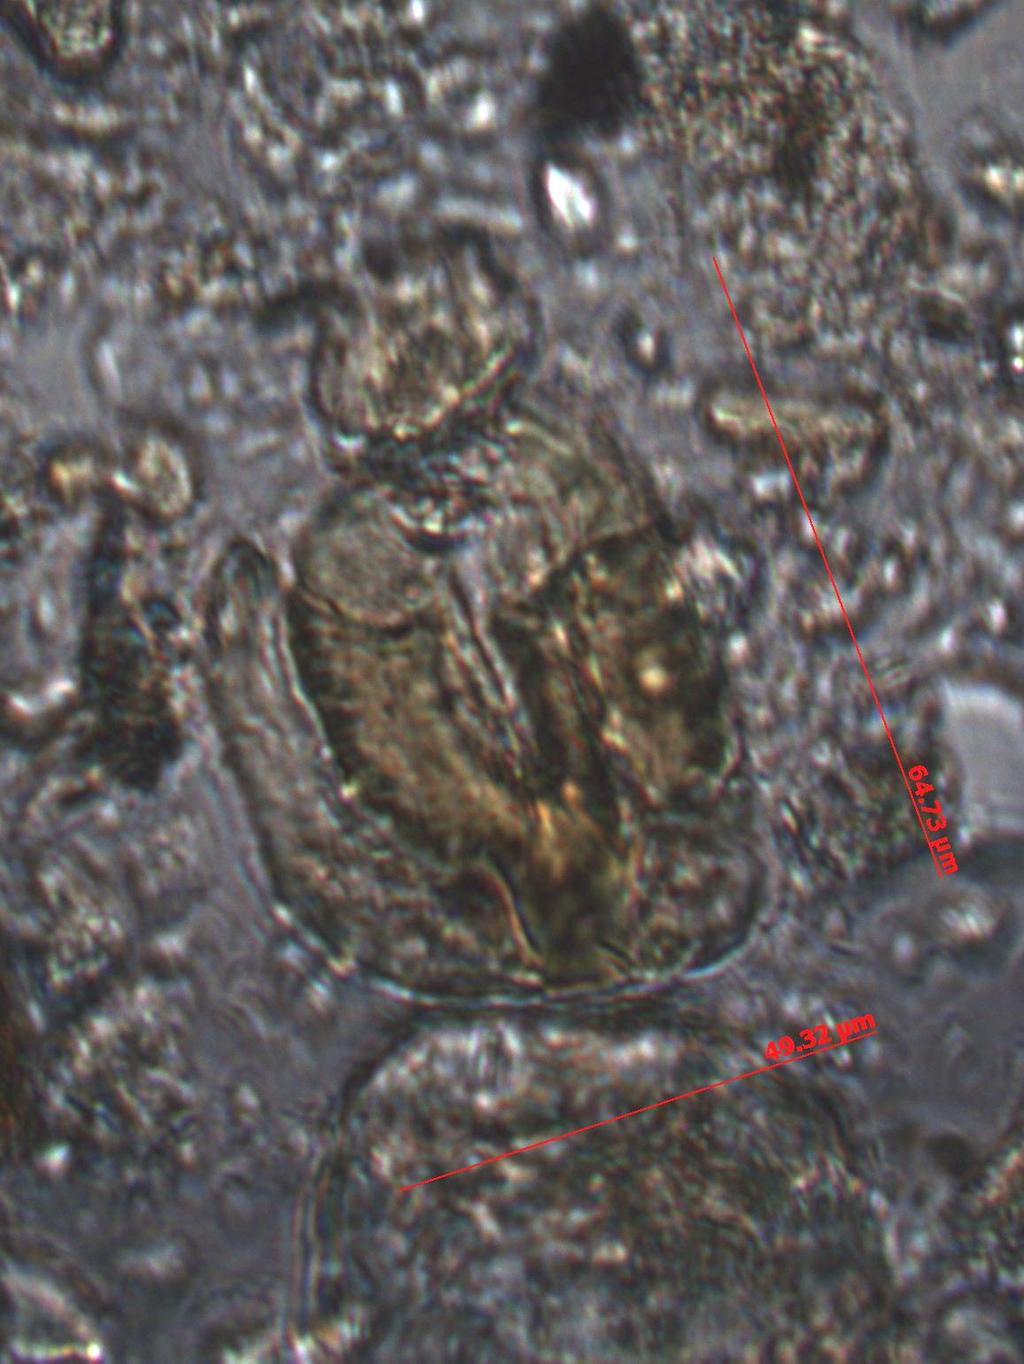 Figure 4. Poorly preserved larval nematode from Atlatl Cave.